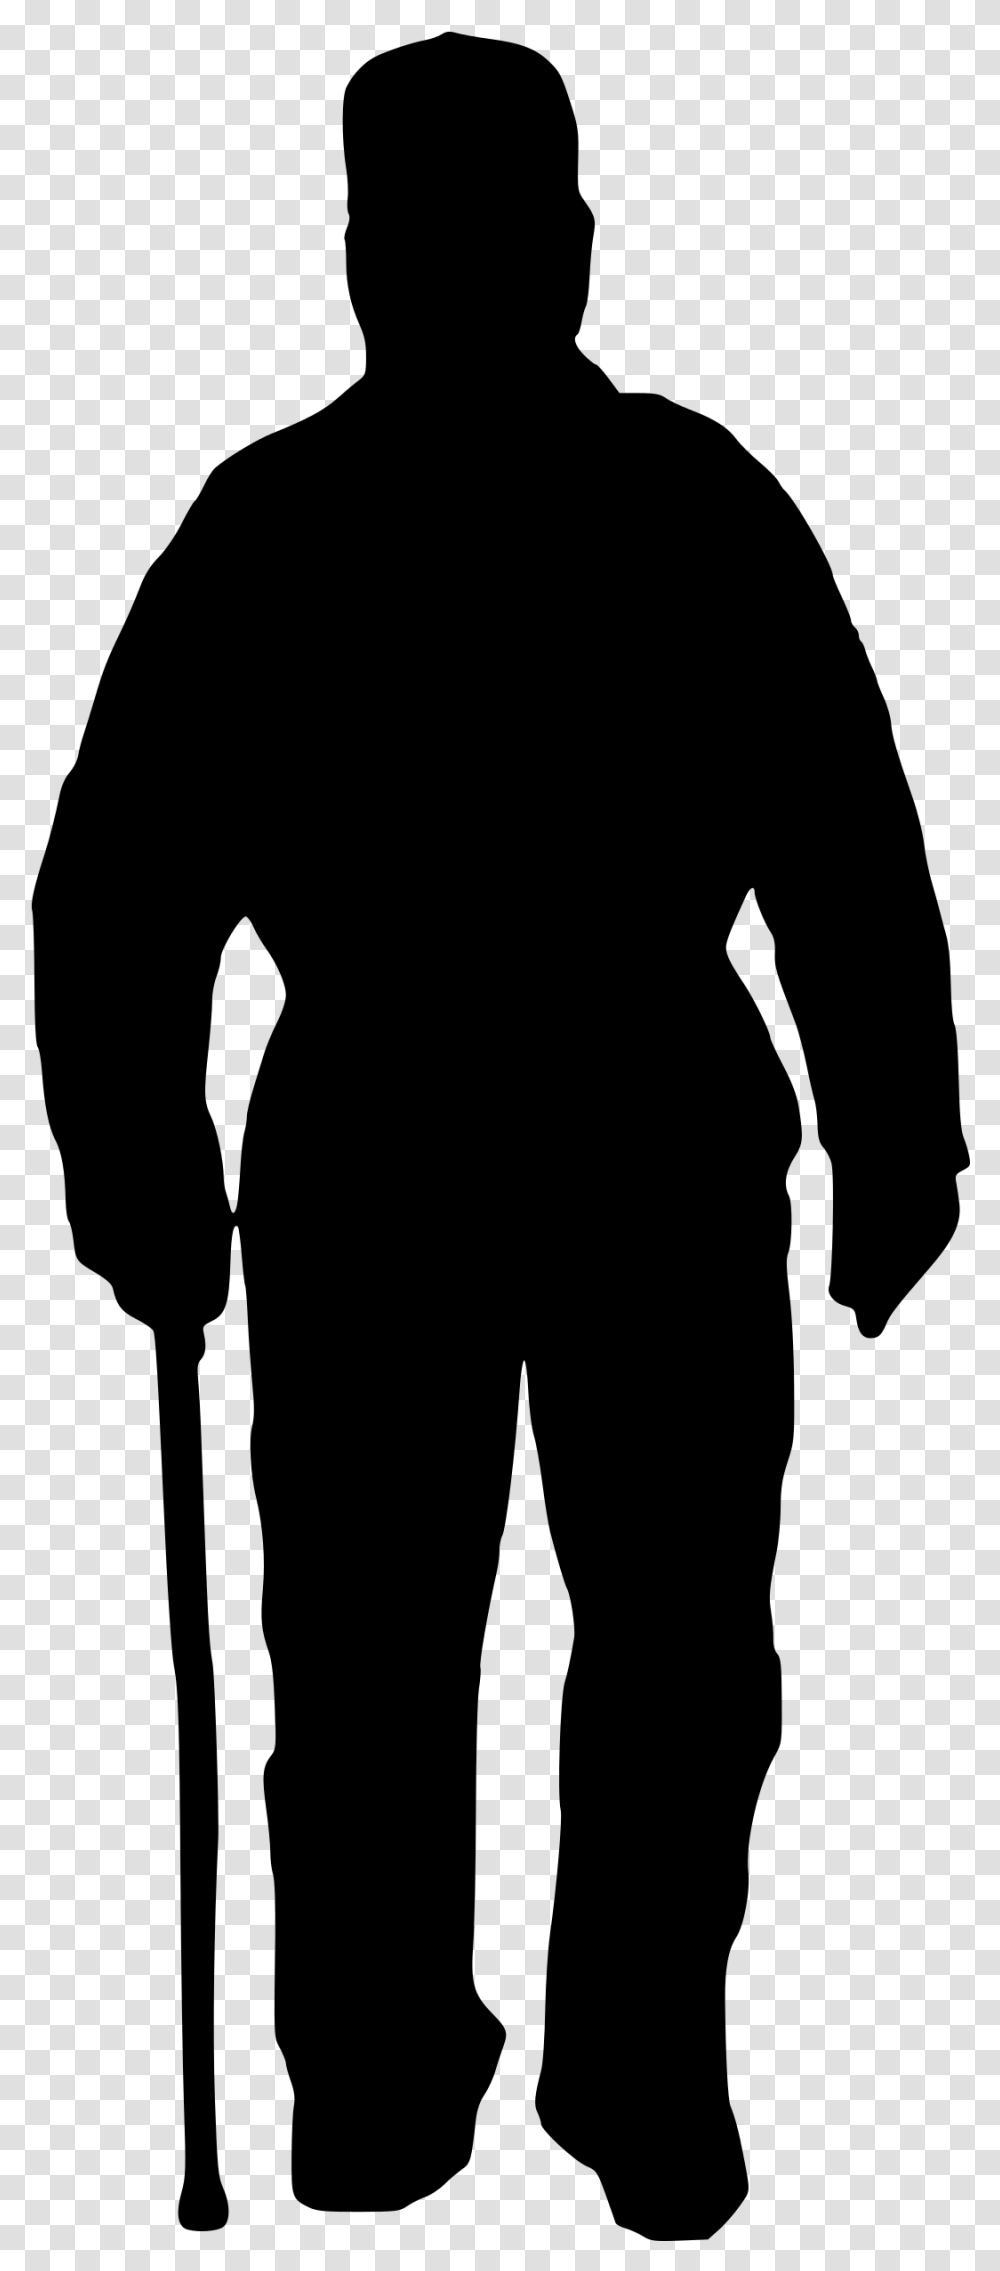 Image Result For Silhouette Old Man Figures Old Man Silhouette Gif, Gray, World Of Warcraft Transparent Png